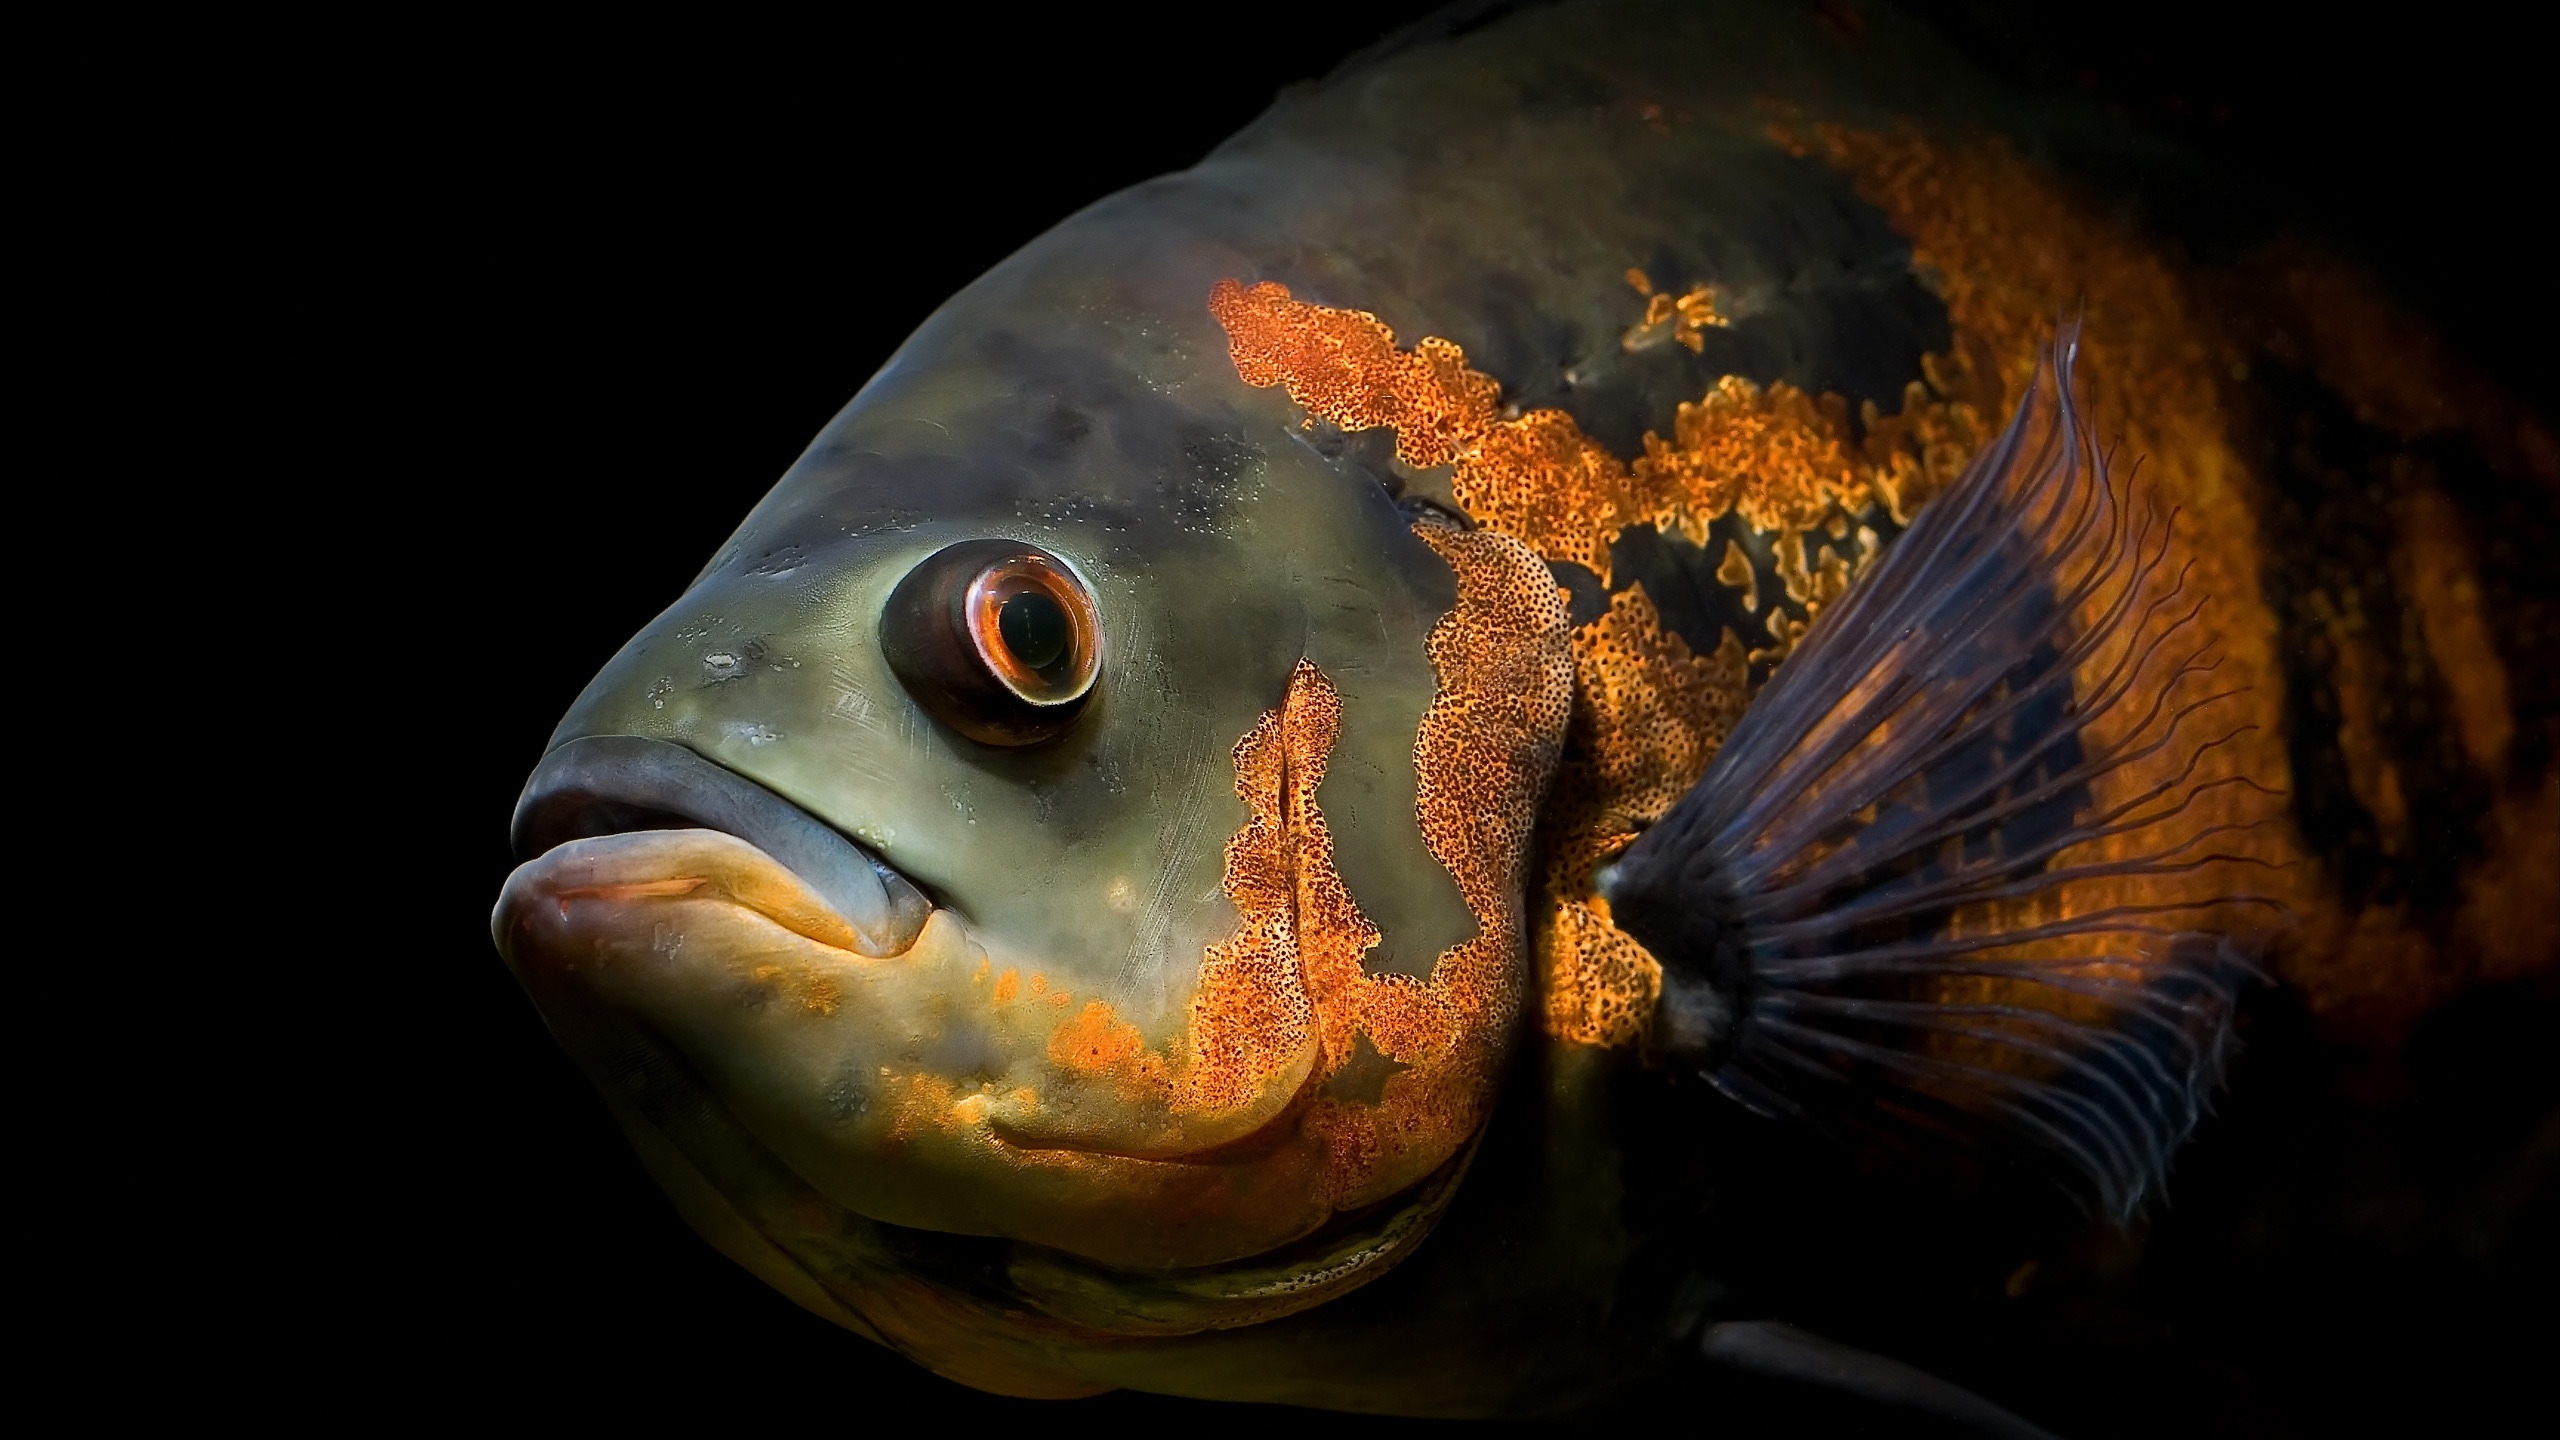 Powerful fish for 2560x1440 HDTV resolution